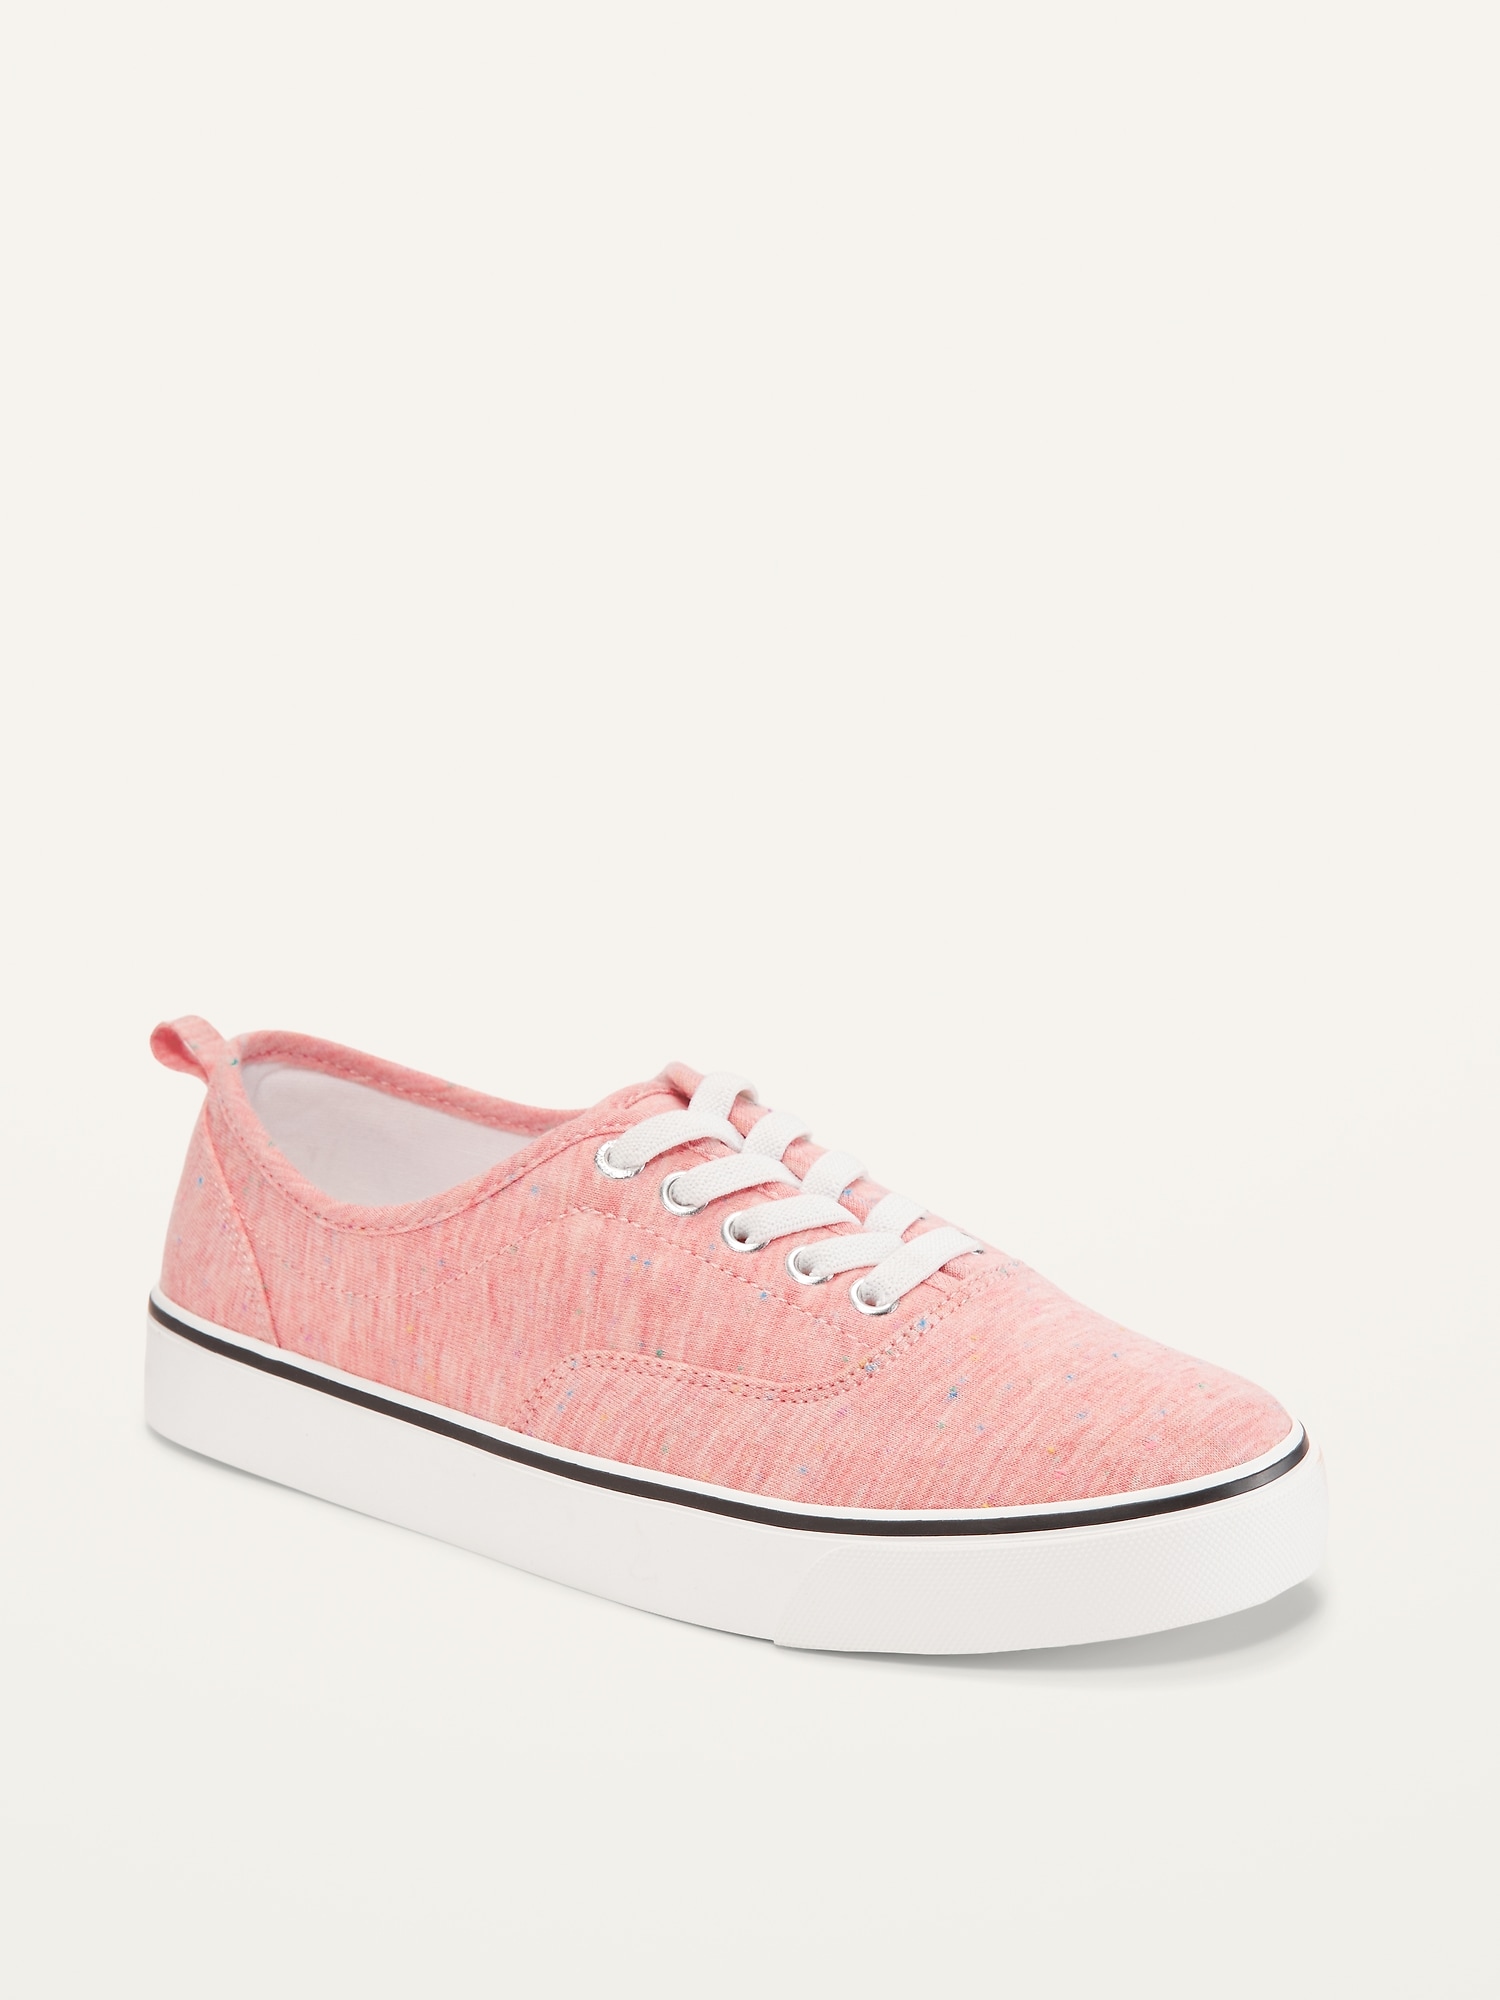 Speckled Jersey-Knit Elastic-Lace Sneakers for Girls | Old Navy